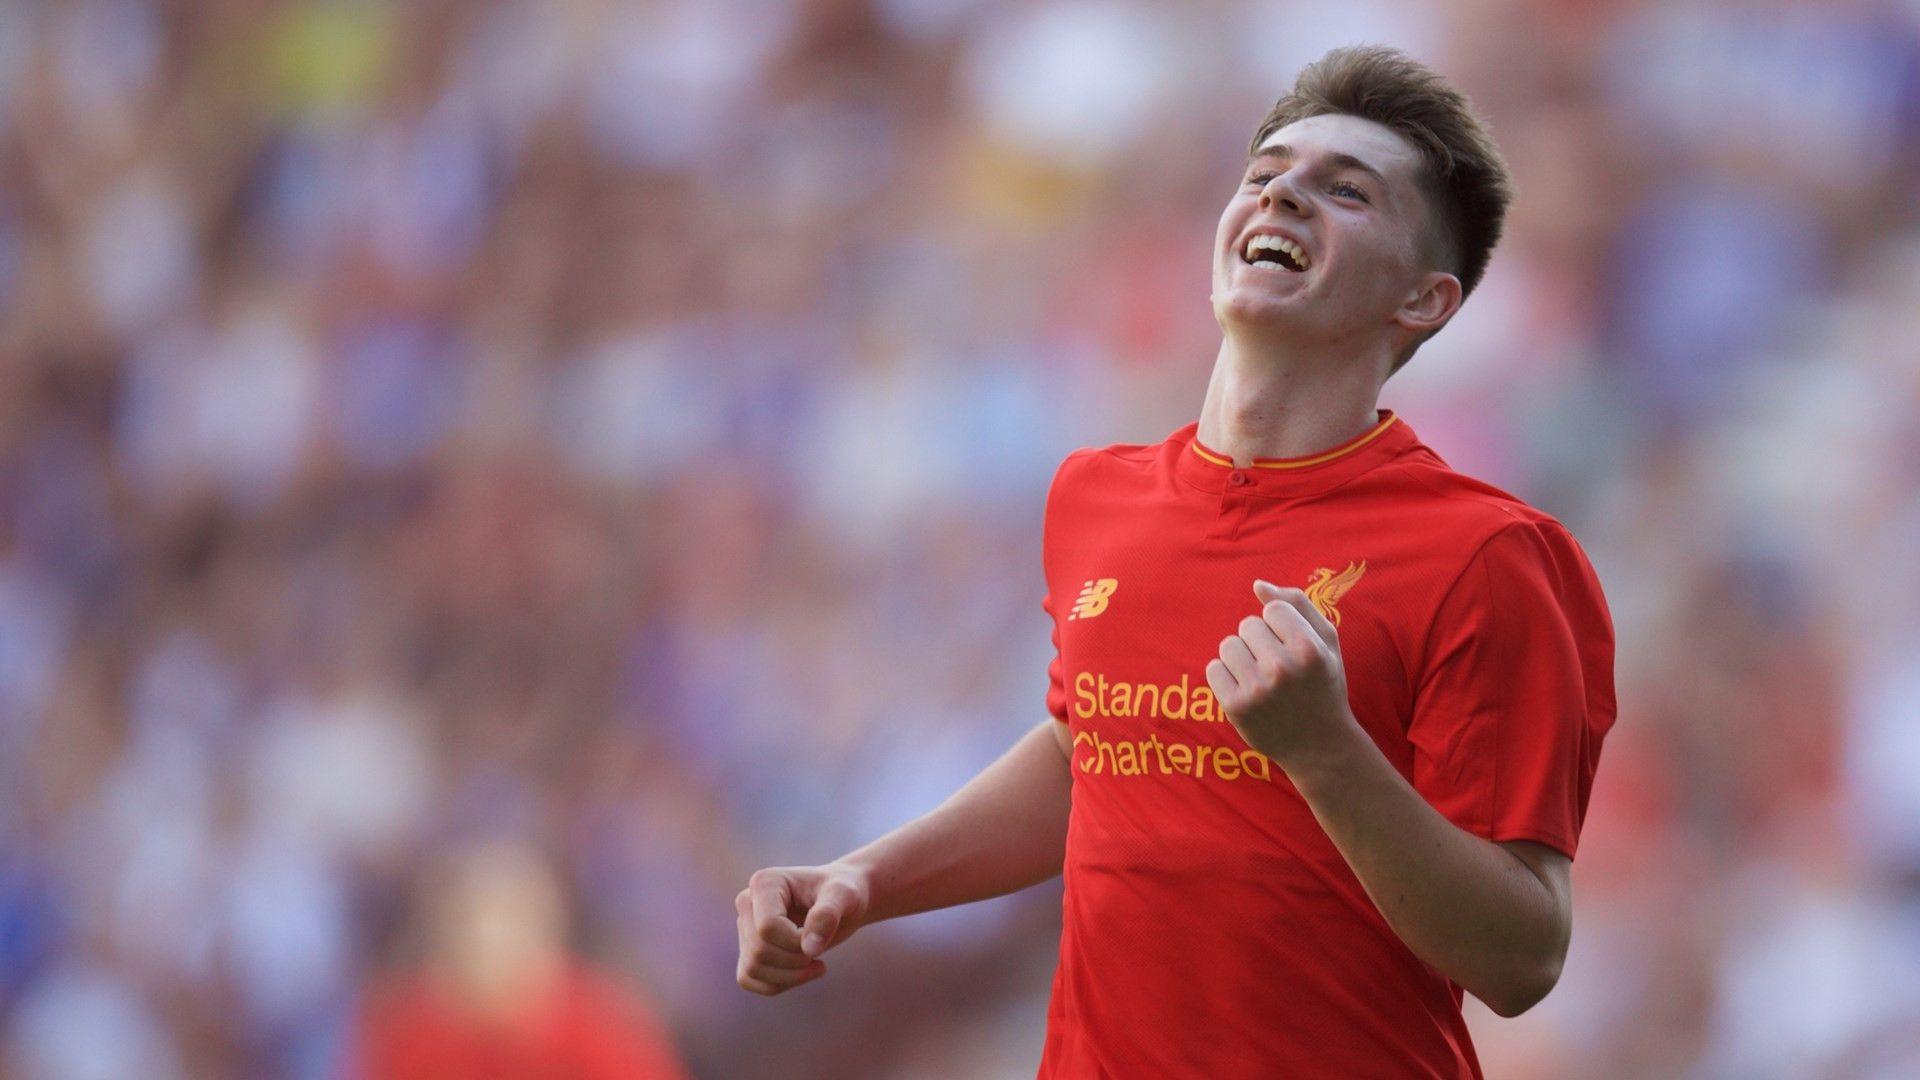 Ben Woodburn Is The Youngest Goalscorers In Liverpool F.C. History